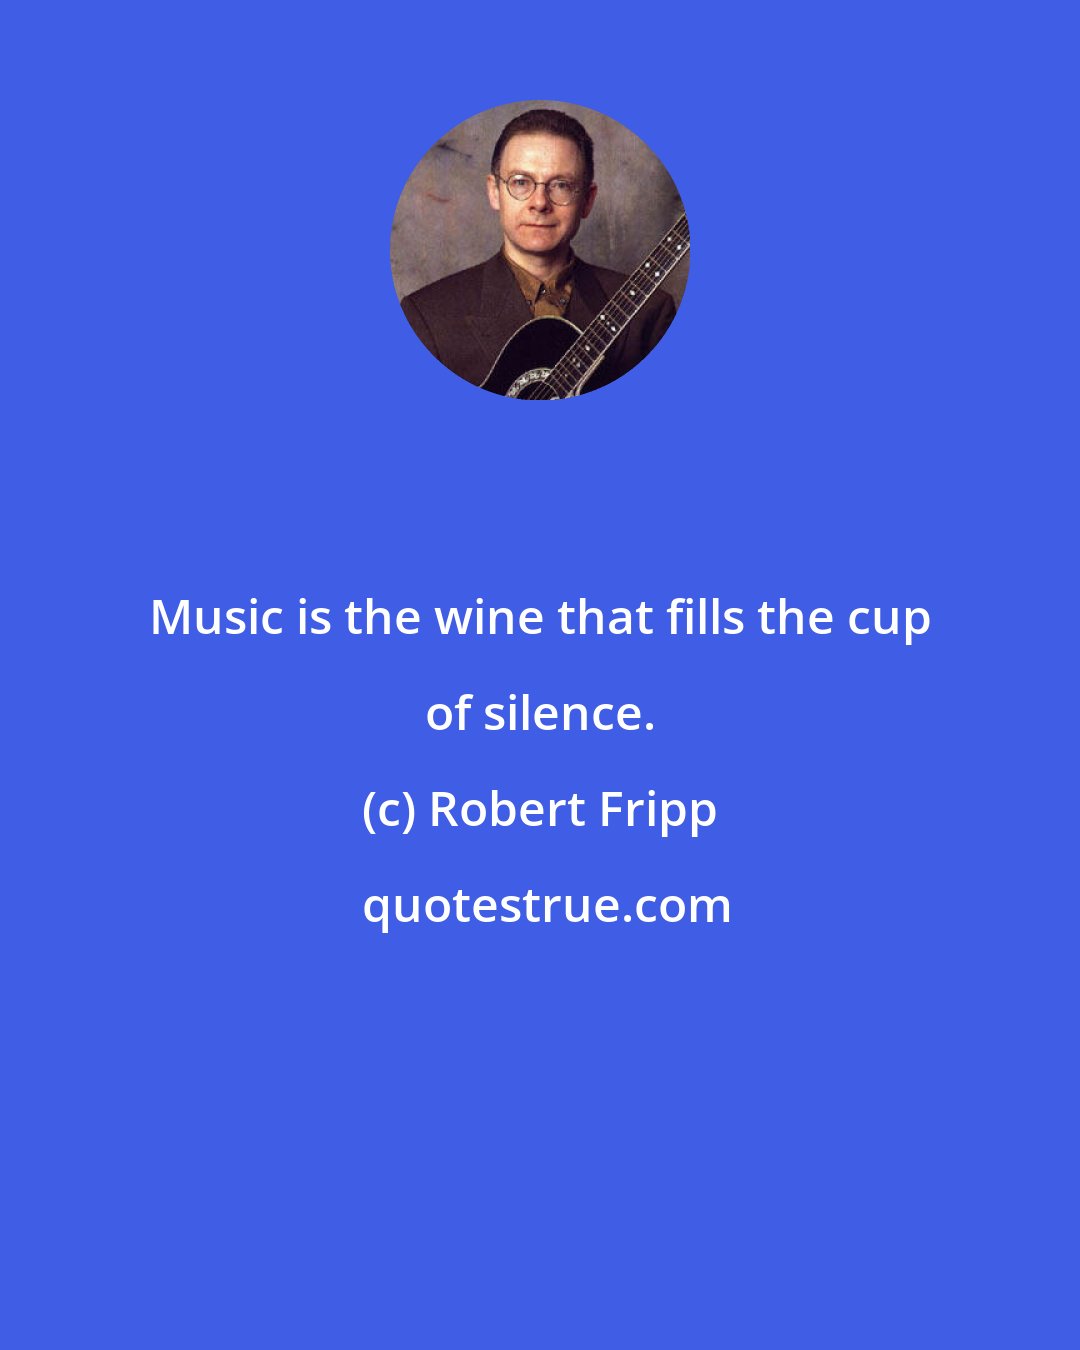 Robert Fripp: Music is the wine that fills the cup of silence.